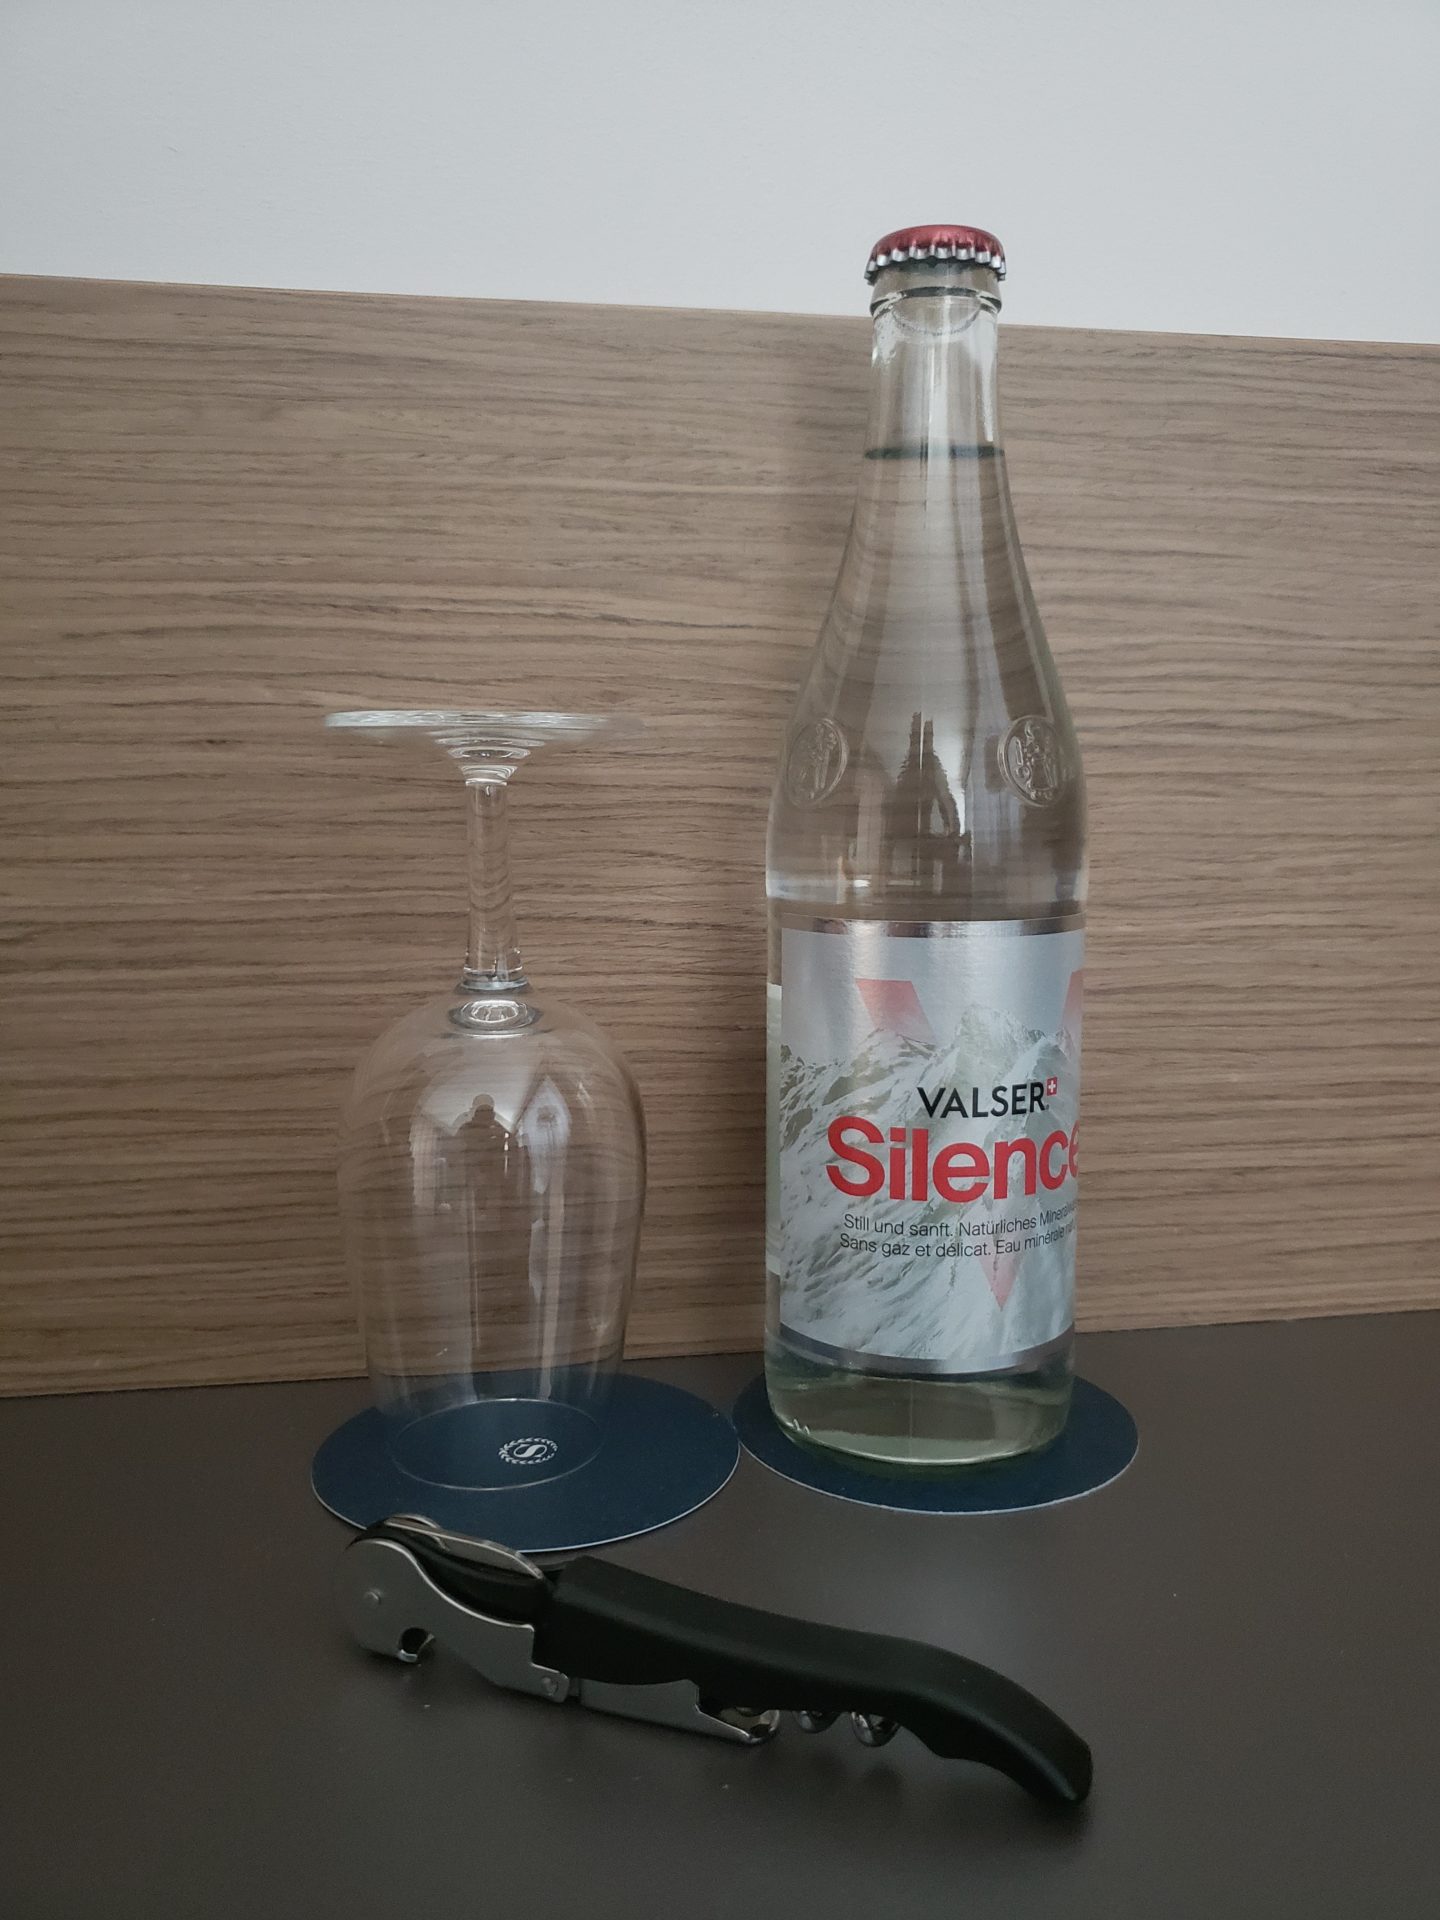 a bottle and glass next to a bottle